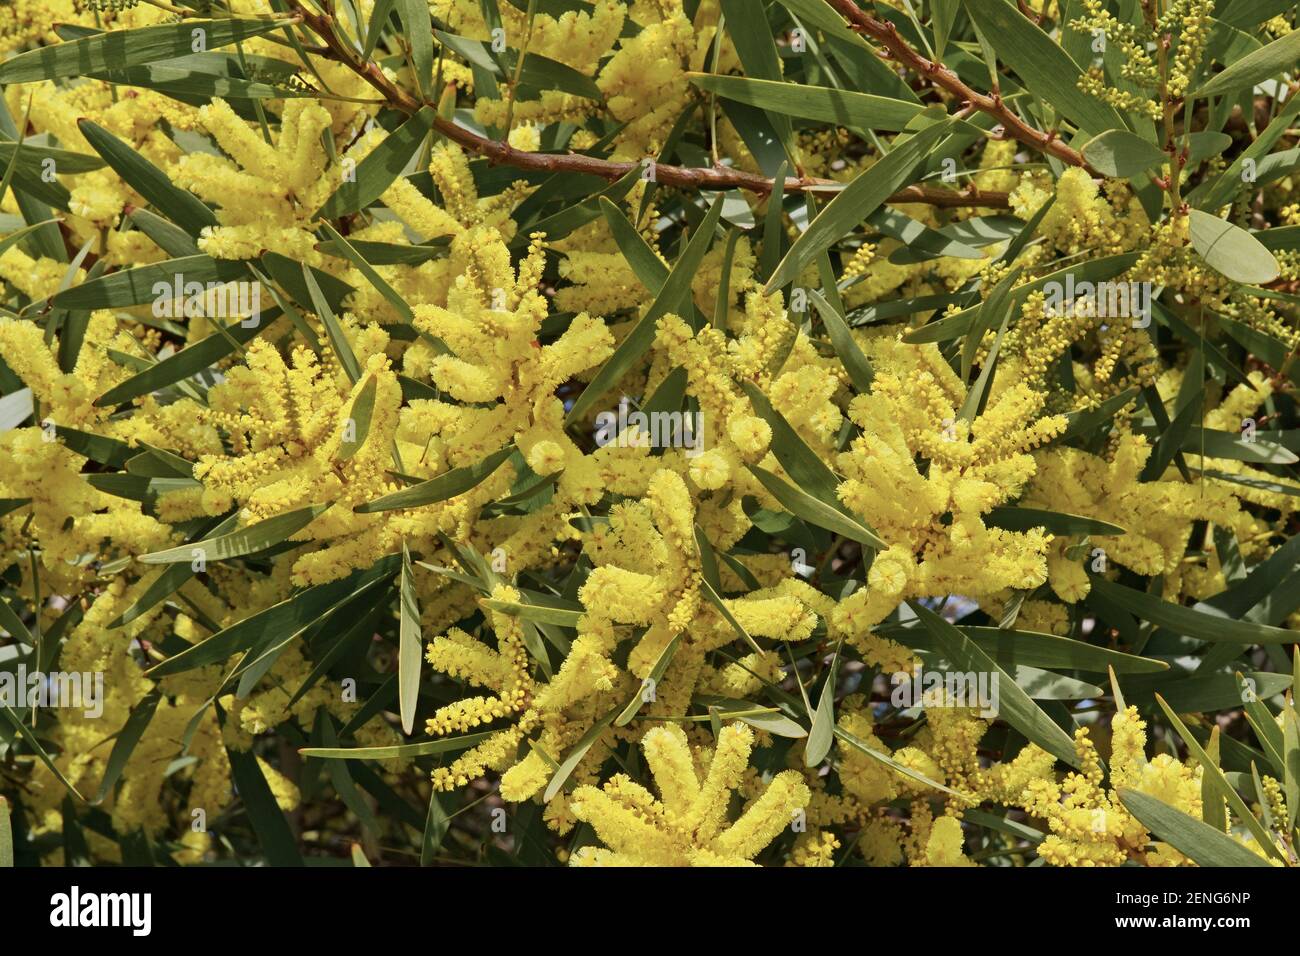 flowers and leaves of Sydney golden wattle Stock Photo